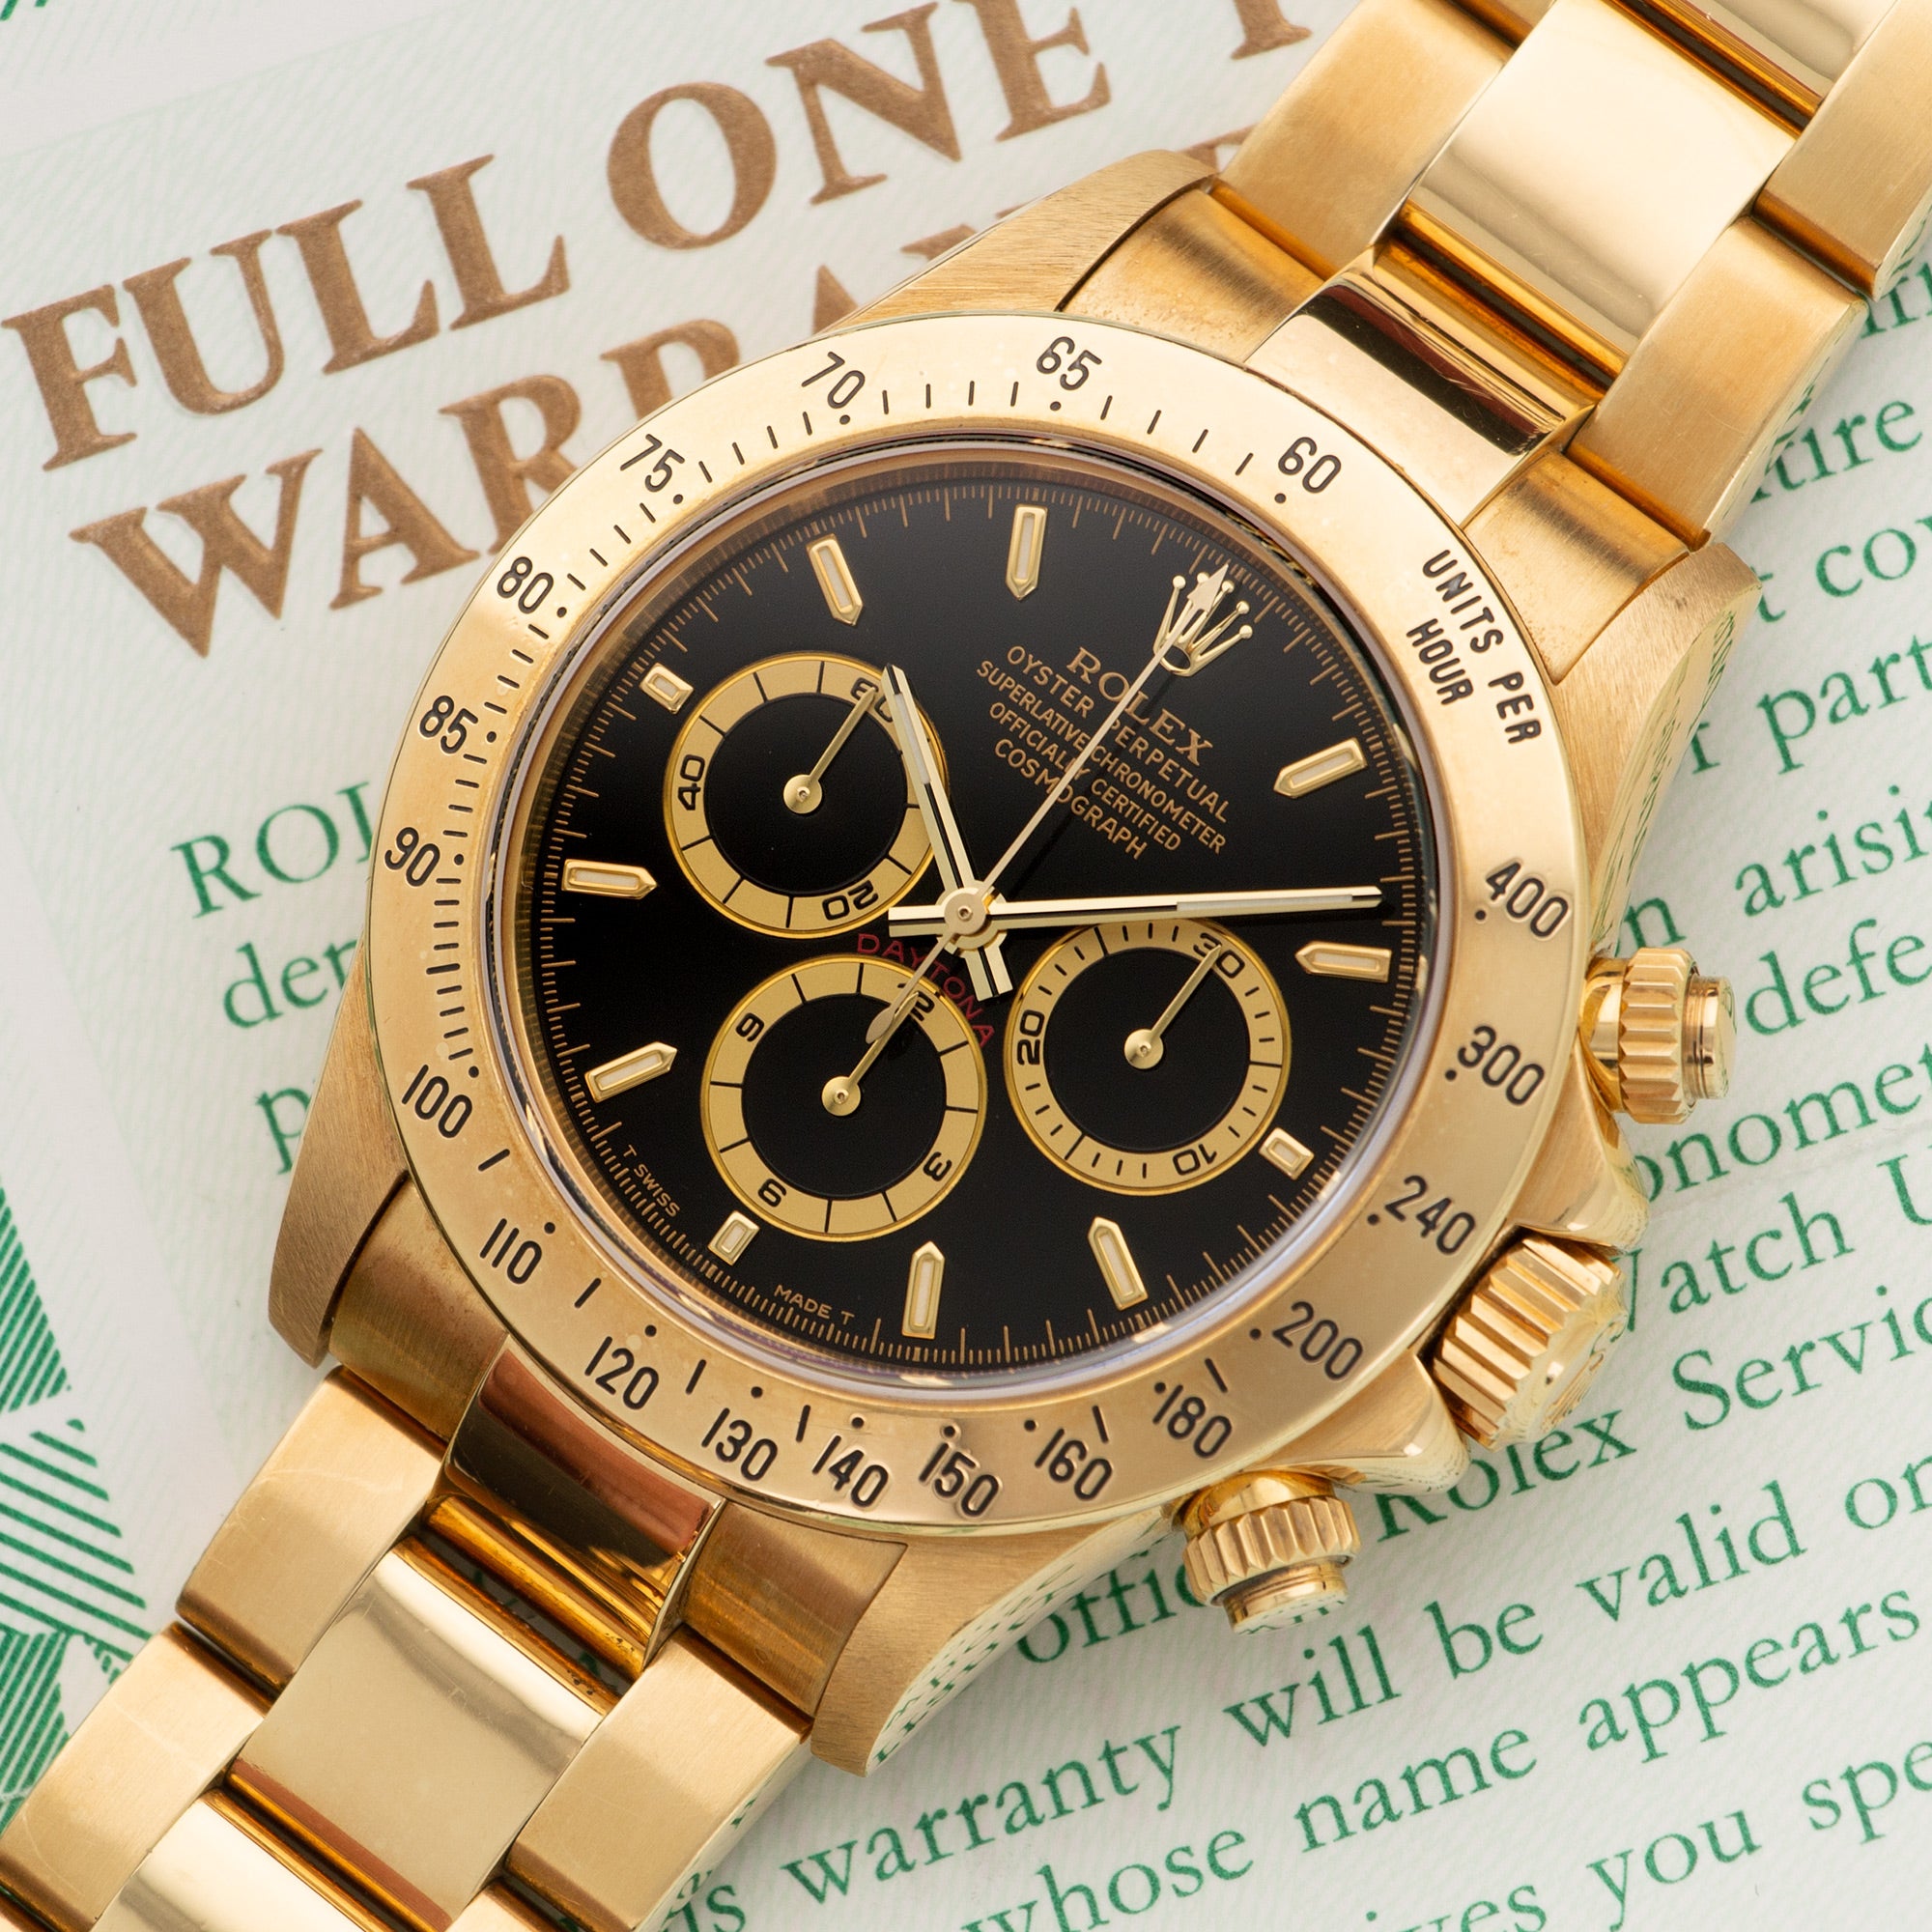 Rolex - Rolex Yellow Gold Cosmograph Daytona Watch Ref. 16528 with Original Box and Papers - The Keystone Watches